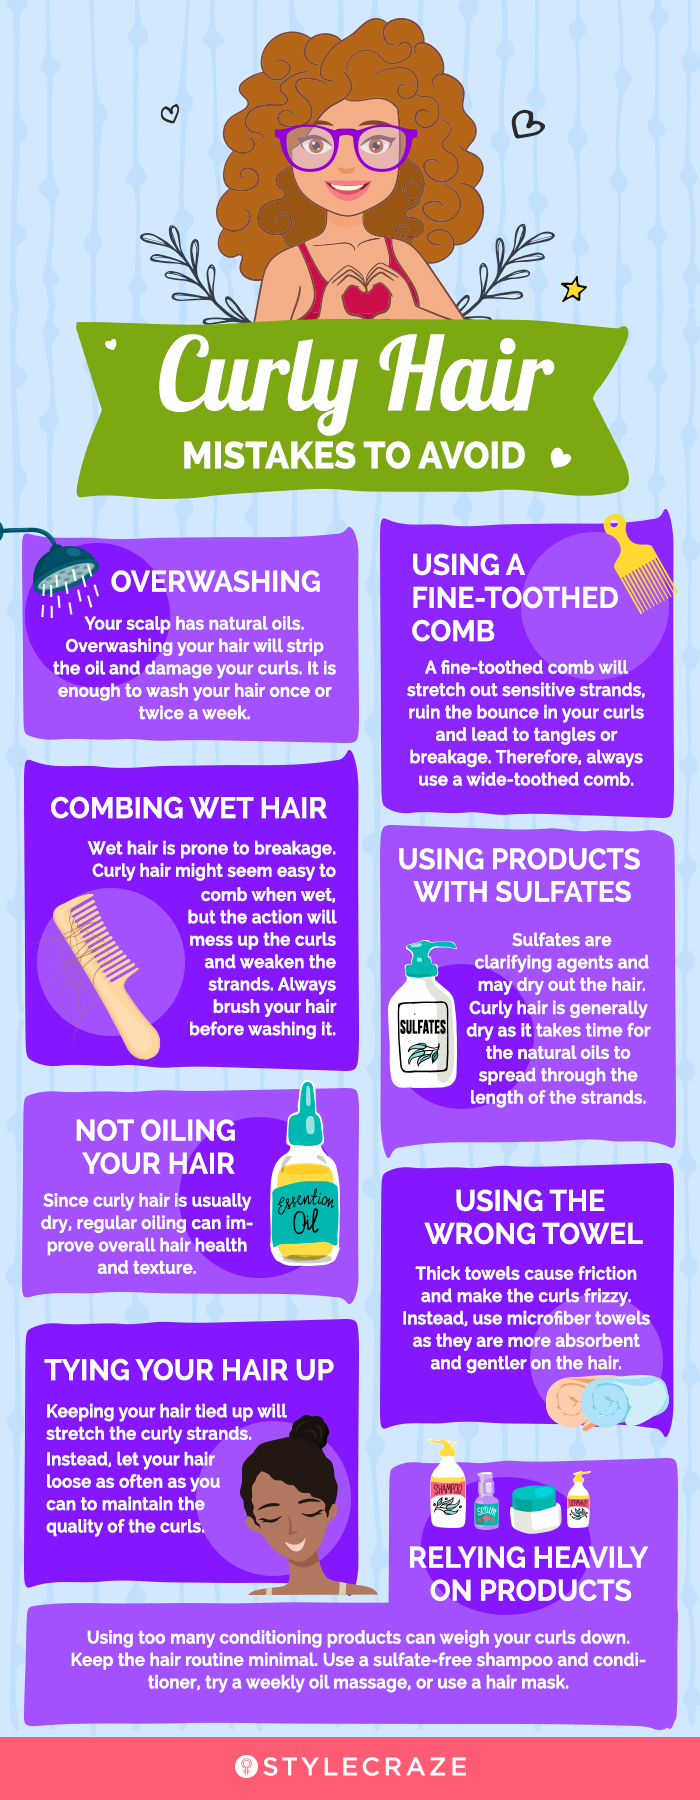 curly hair mistakes to avoid [infographic]